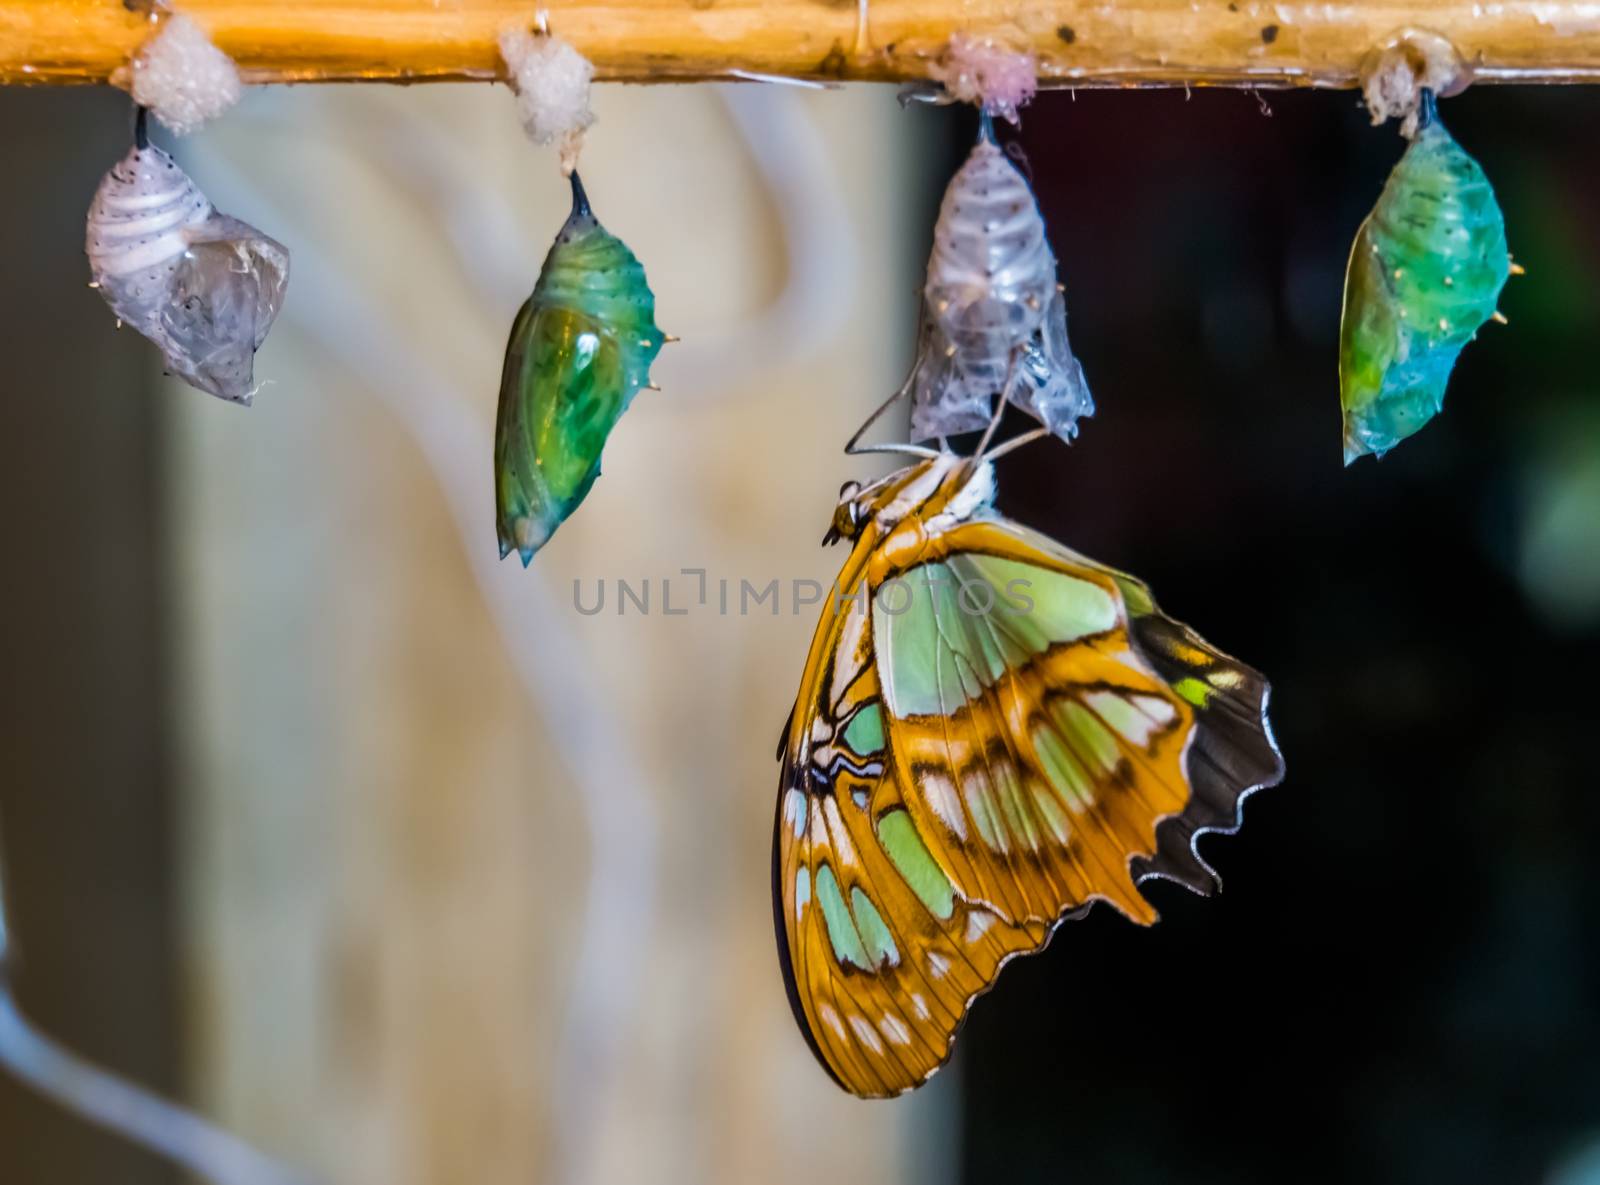 malachite butterfly coming out of its cocoon, pupation process, Entomoculture background by charlottebleijenberg